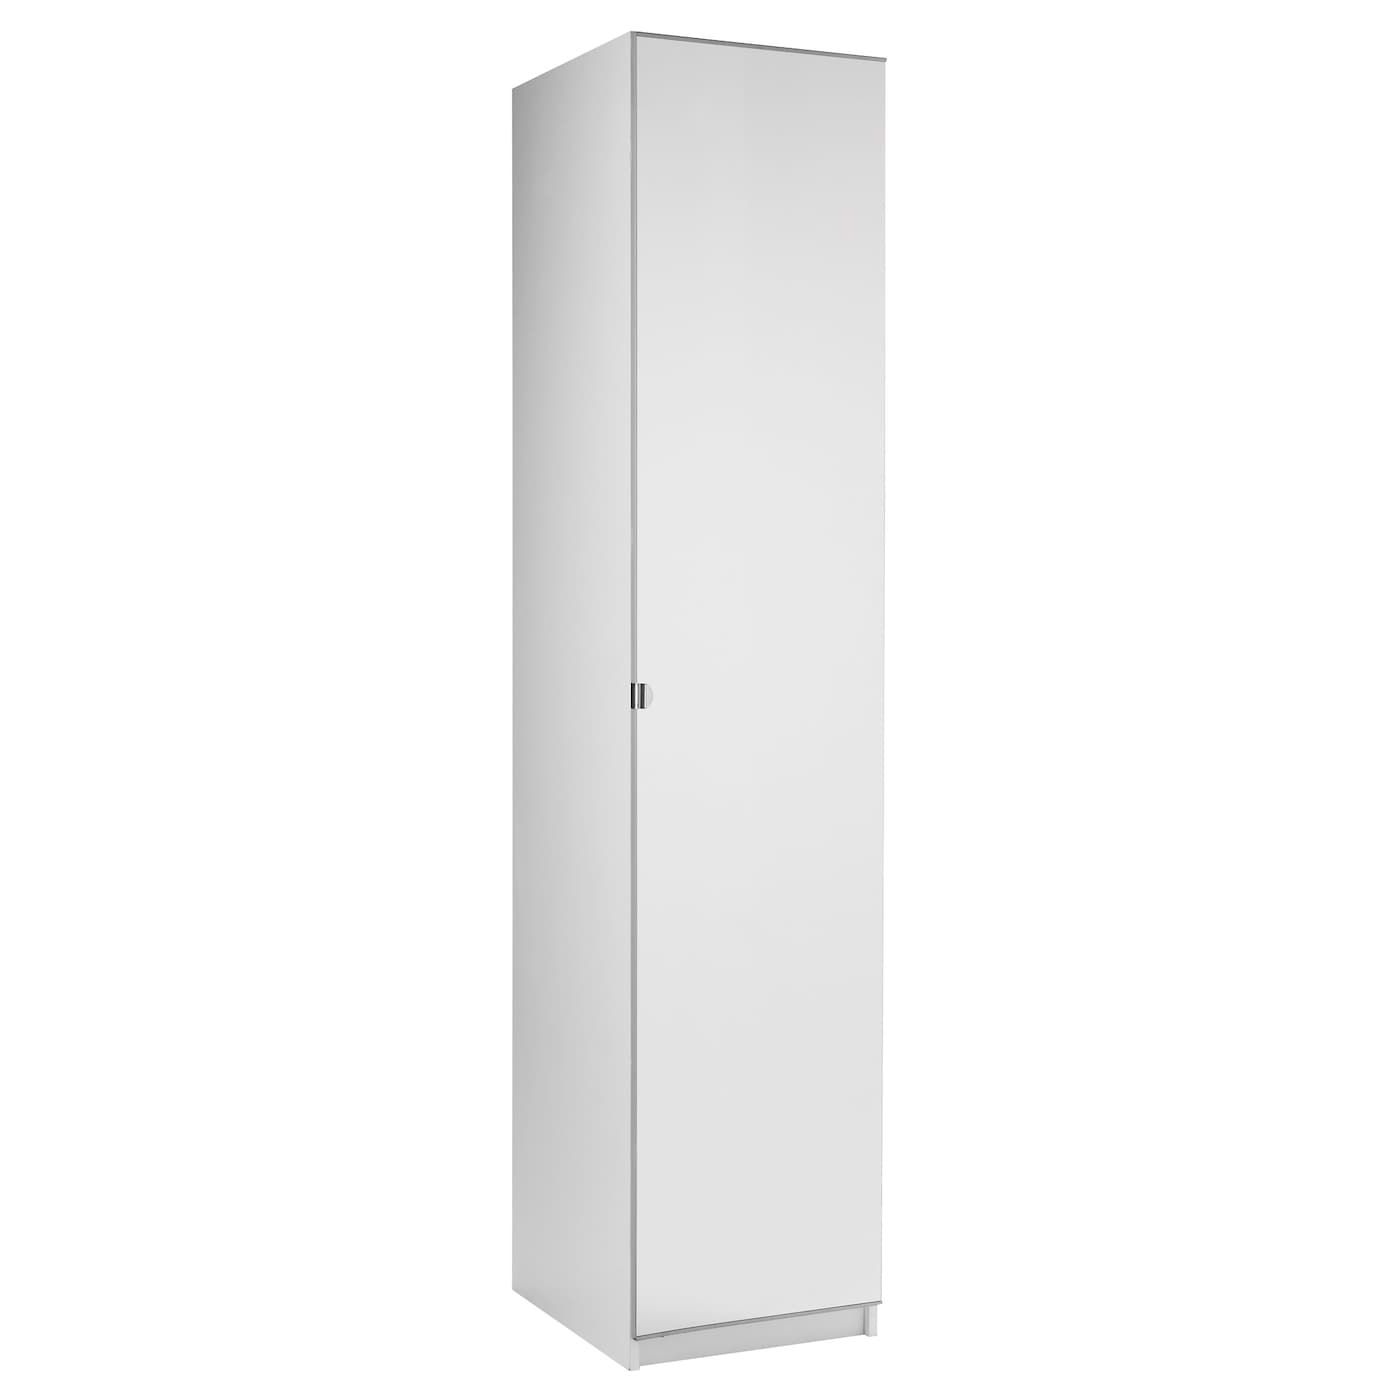 Pax / Vikedal Wardrobe With 1 Door, White/mirror Glass, 50x60x236 Cm – Ikea Pertaining To 1 Door Mirrored Wardrobes (View 6 of 20)